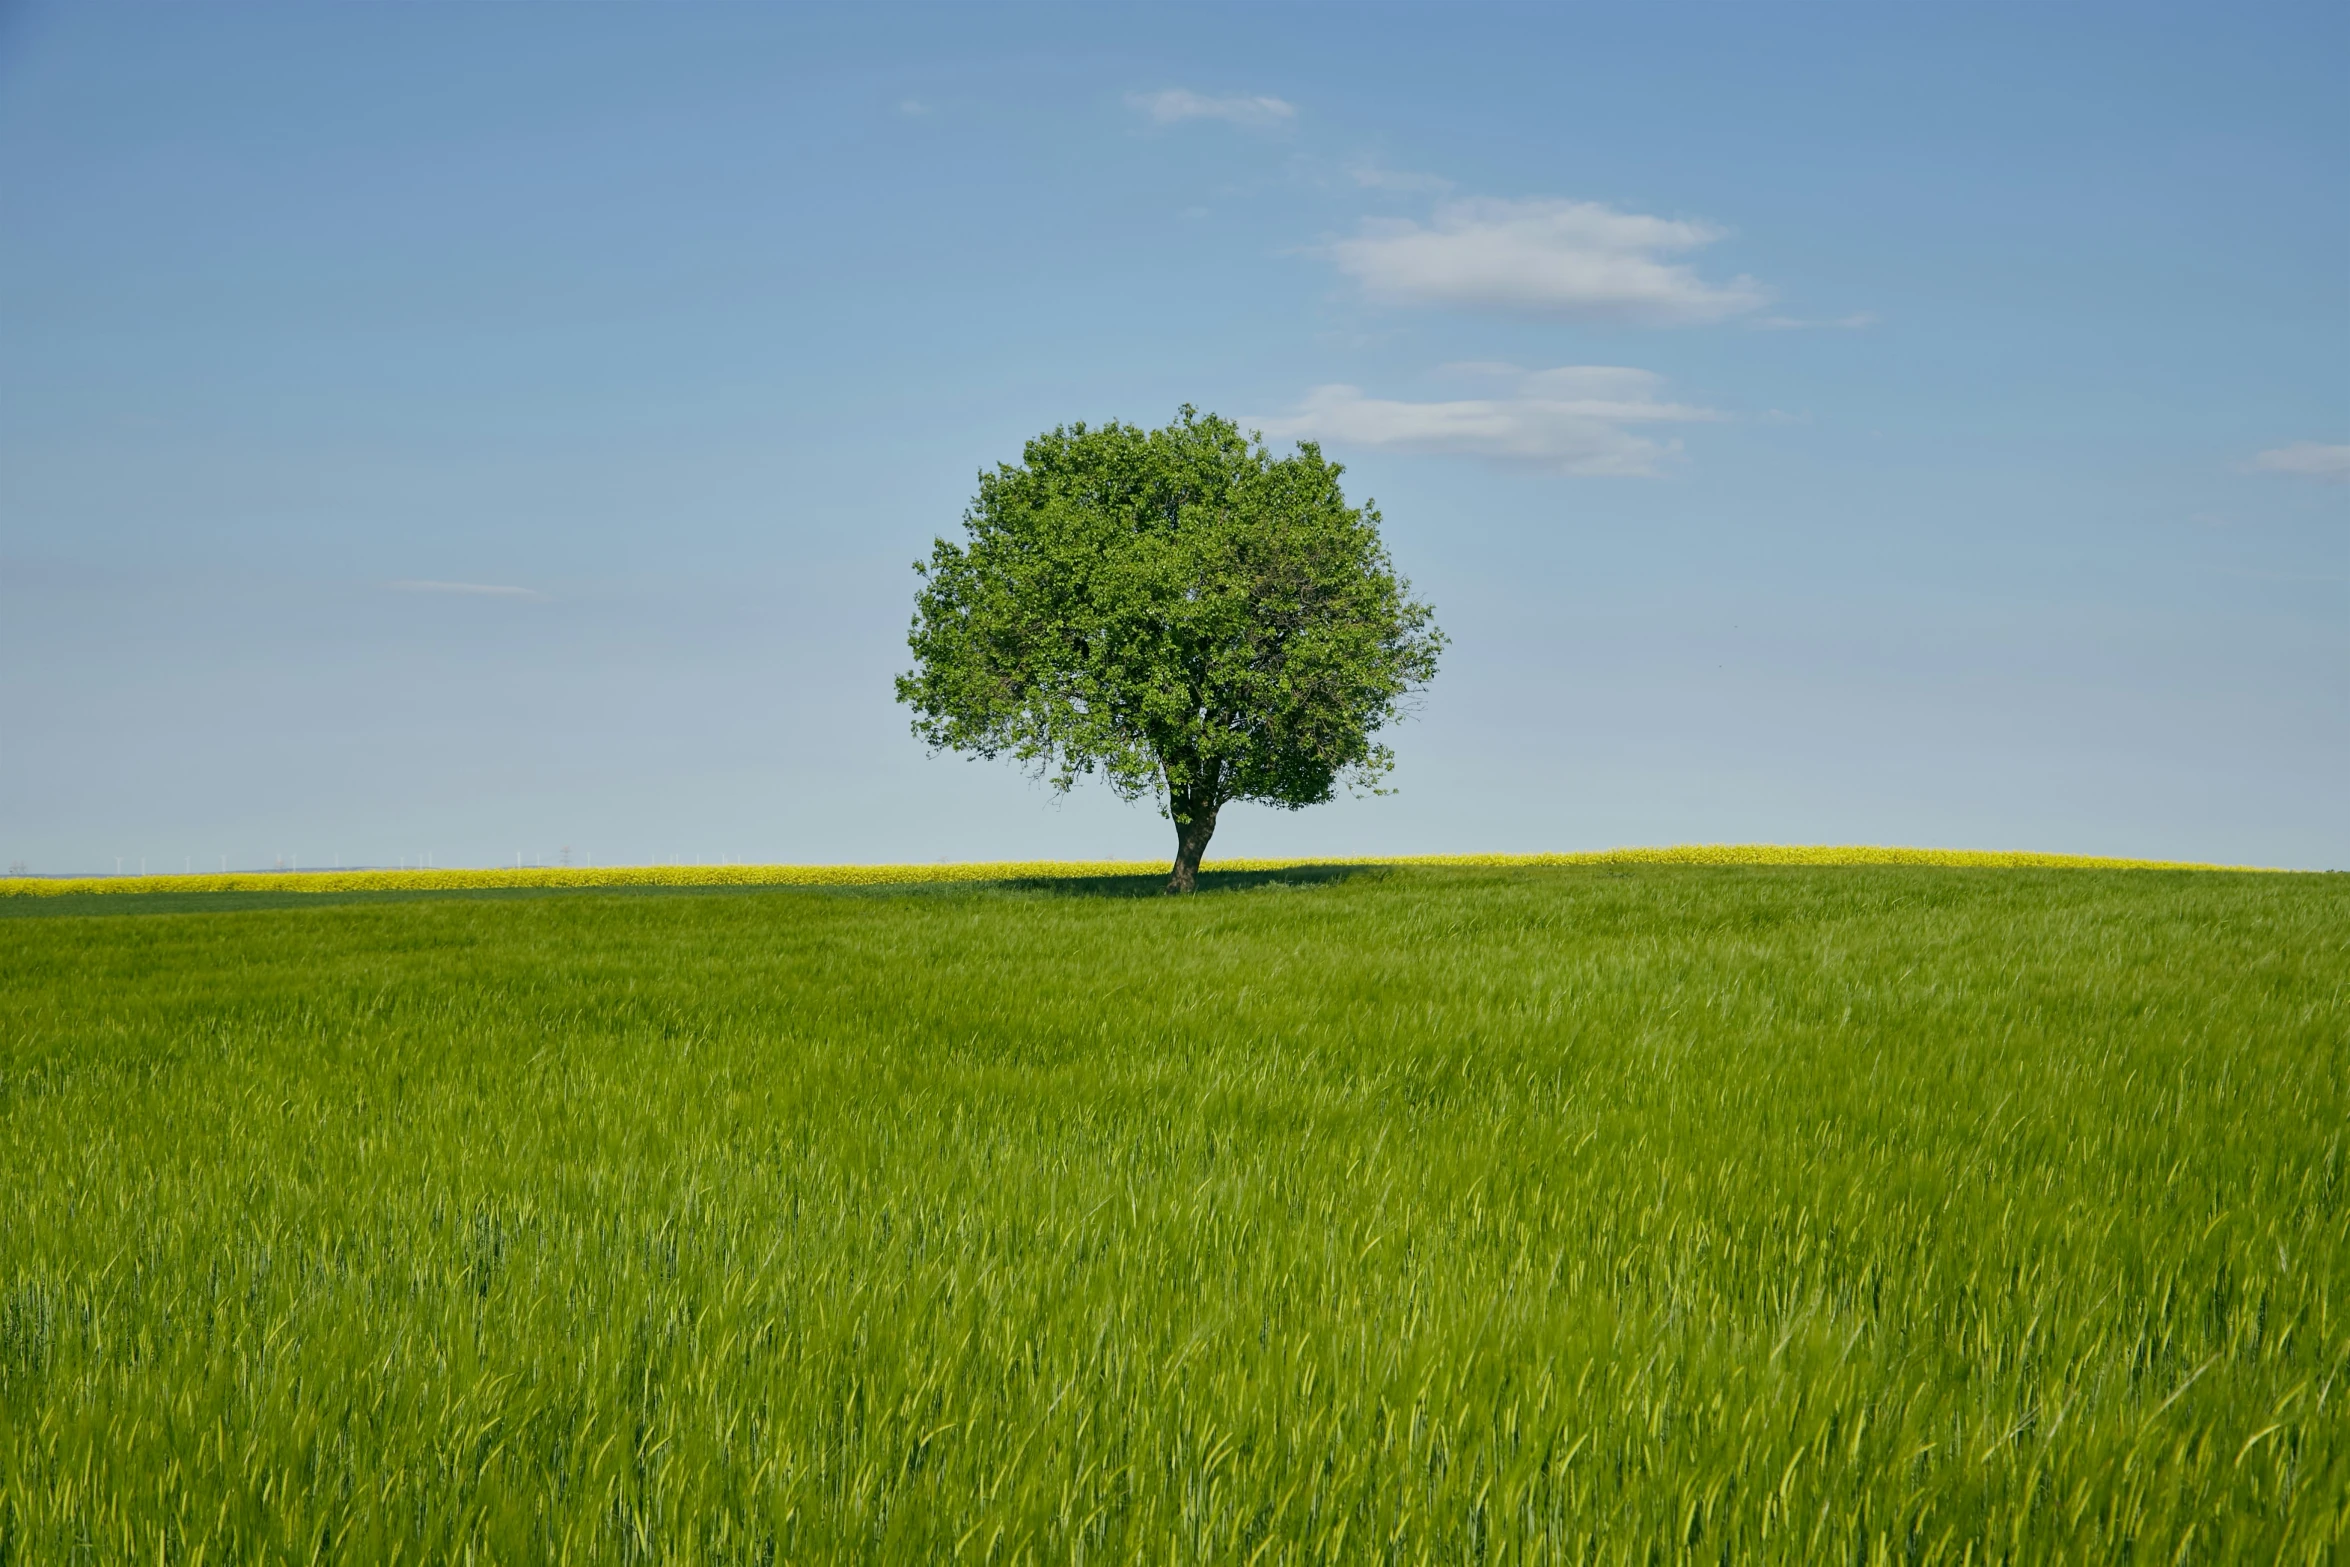 the lone tree is standing in the middle of a green field